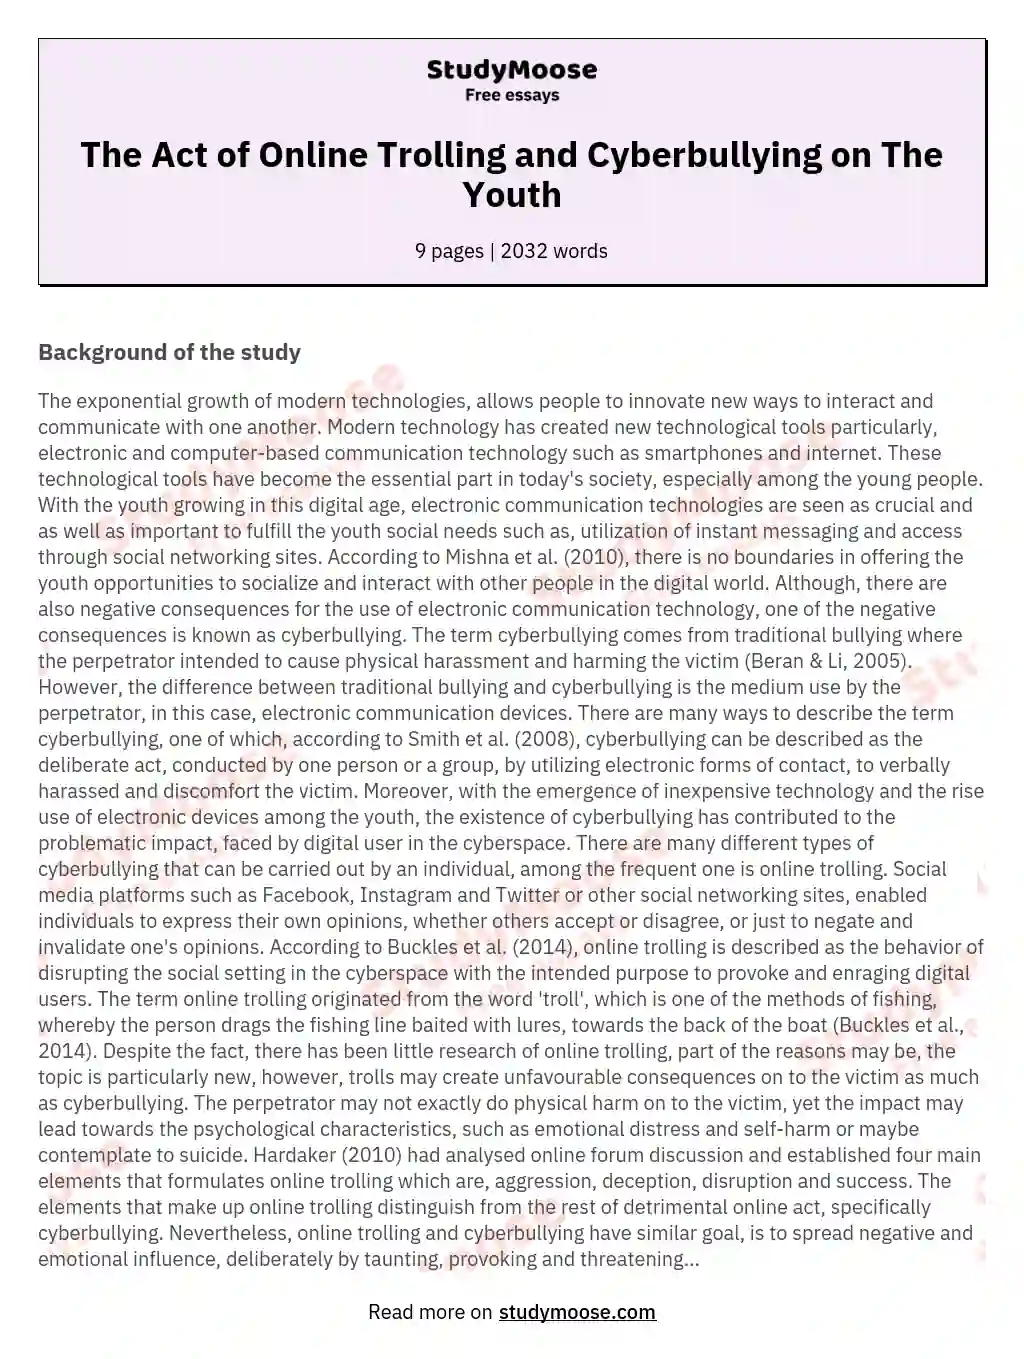 The Act of Online Trolling and Cyberbullying on The Youth essay